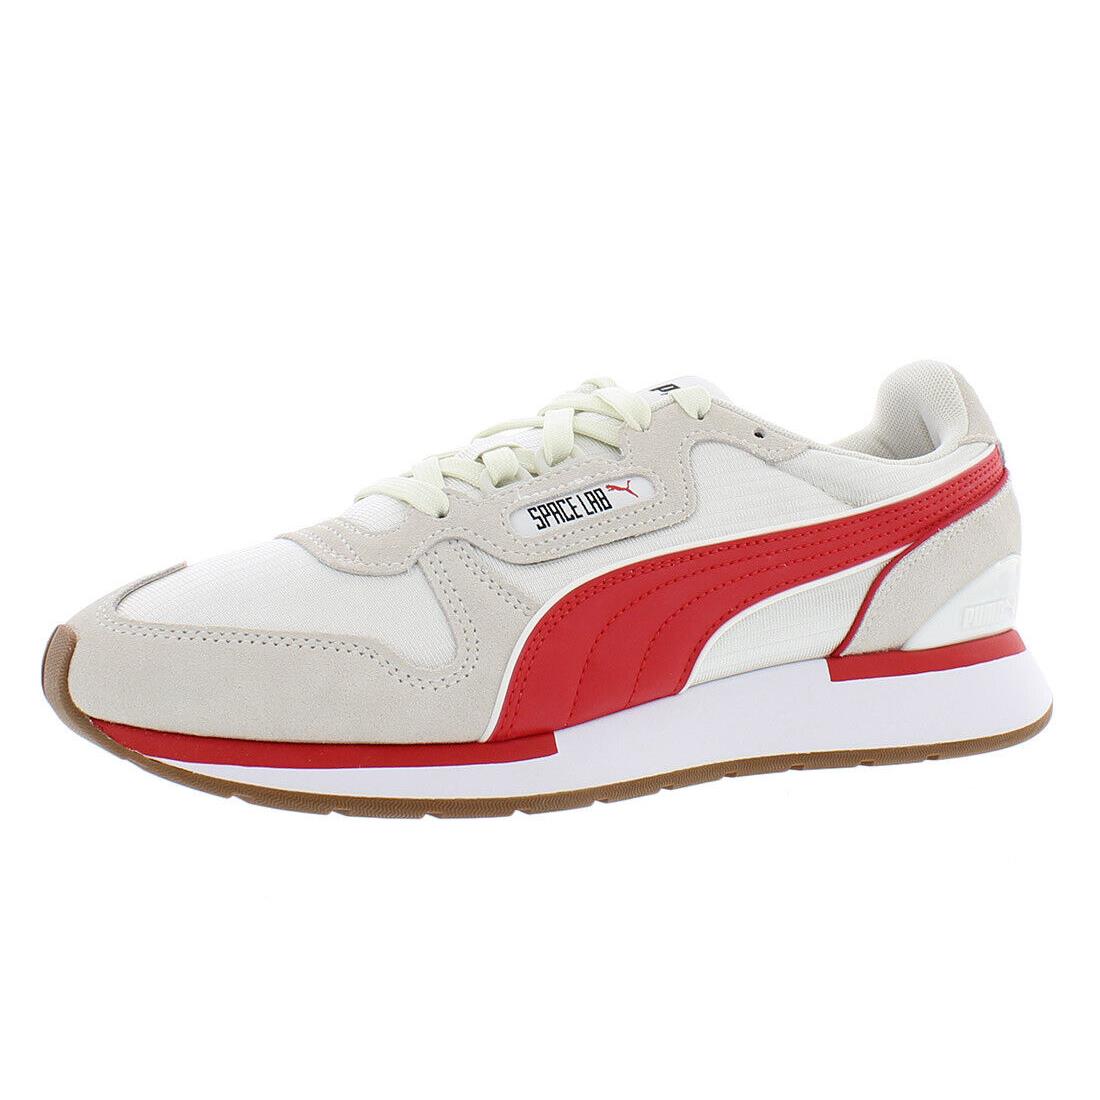 Puma Space Lab Mens Shoes - Vaporous Gray/Red/White, Main: Grey